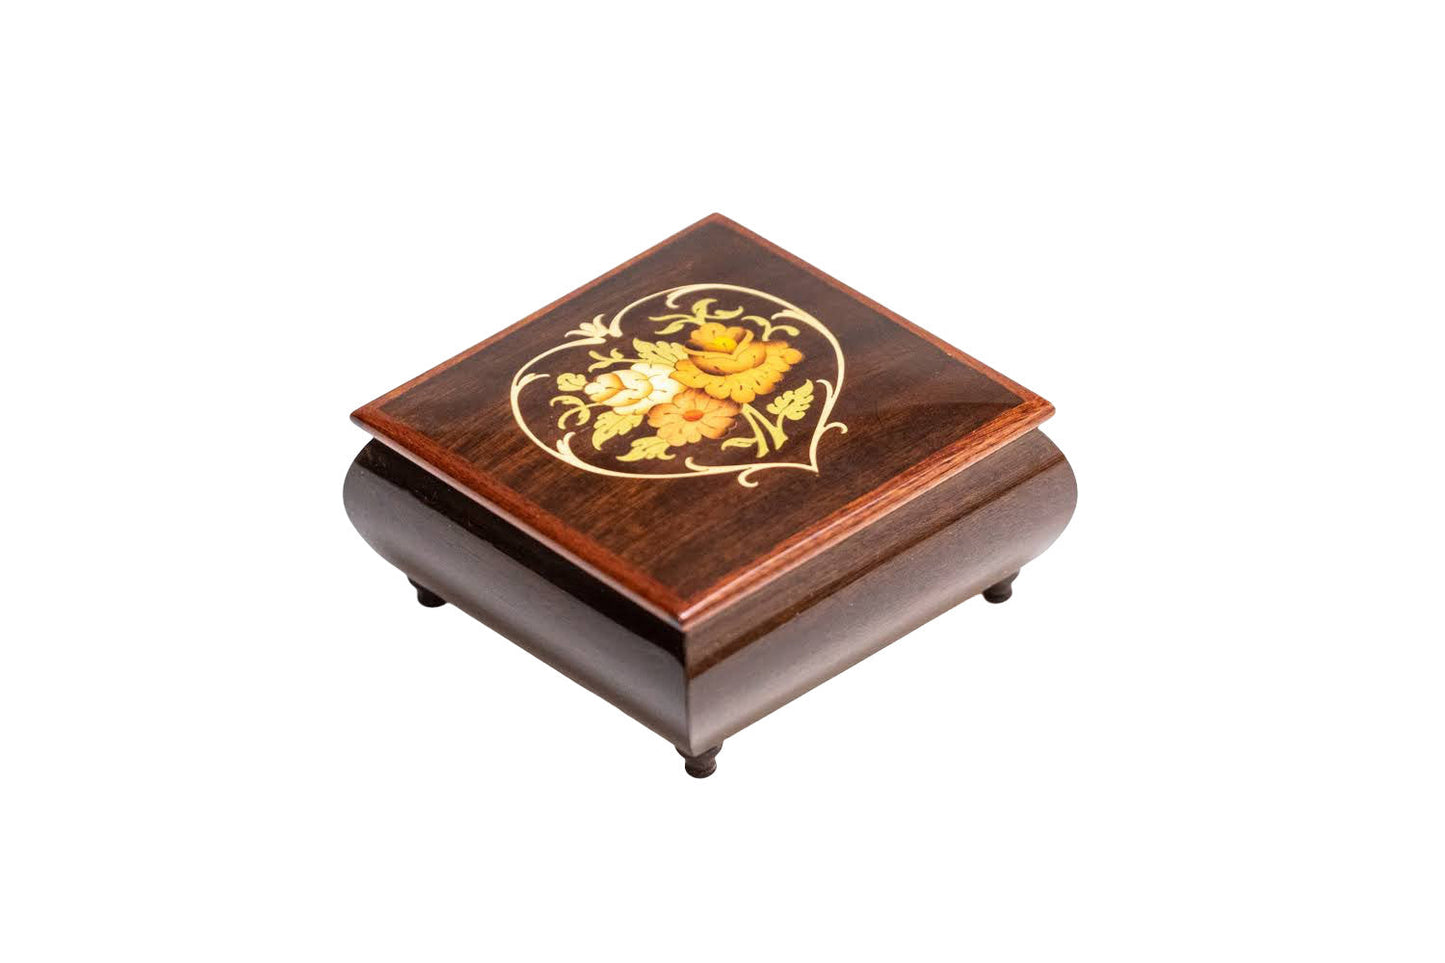 Sorrento Music Box in Brown Flowers Hearts in Glossy finish